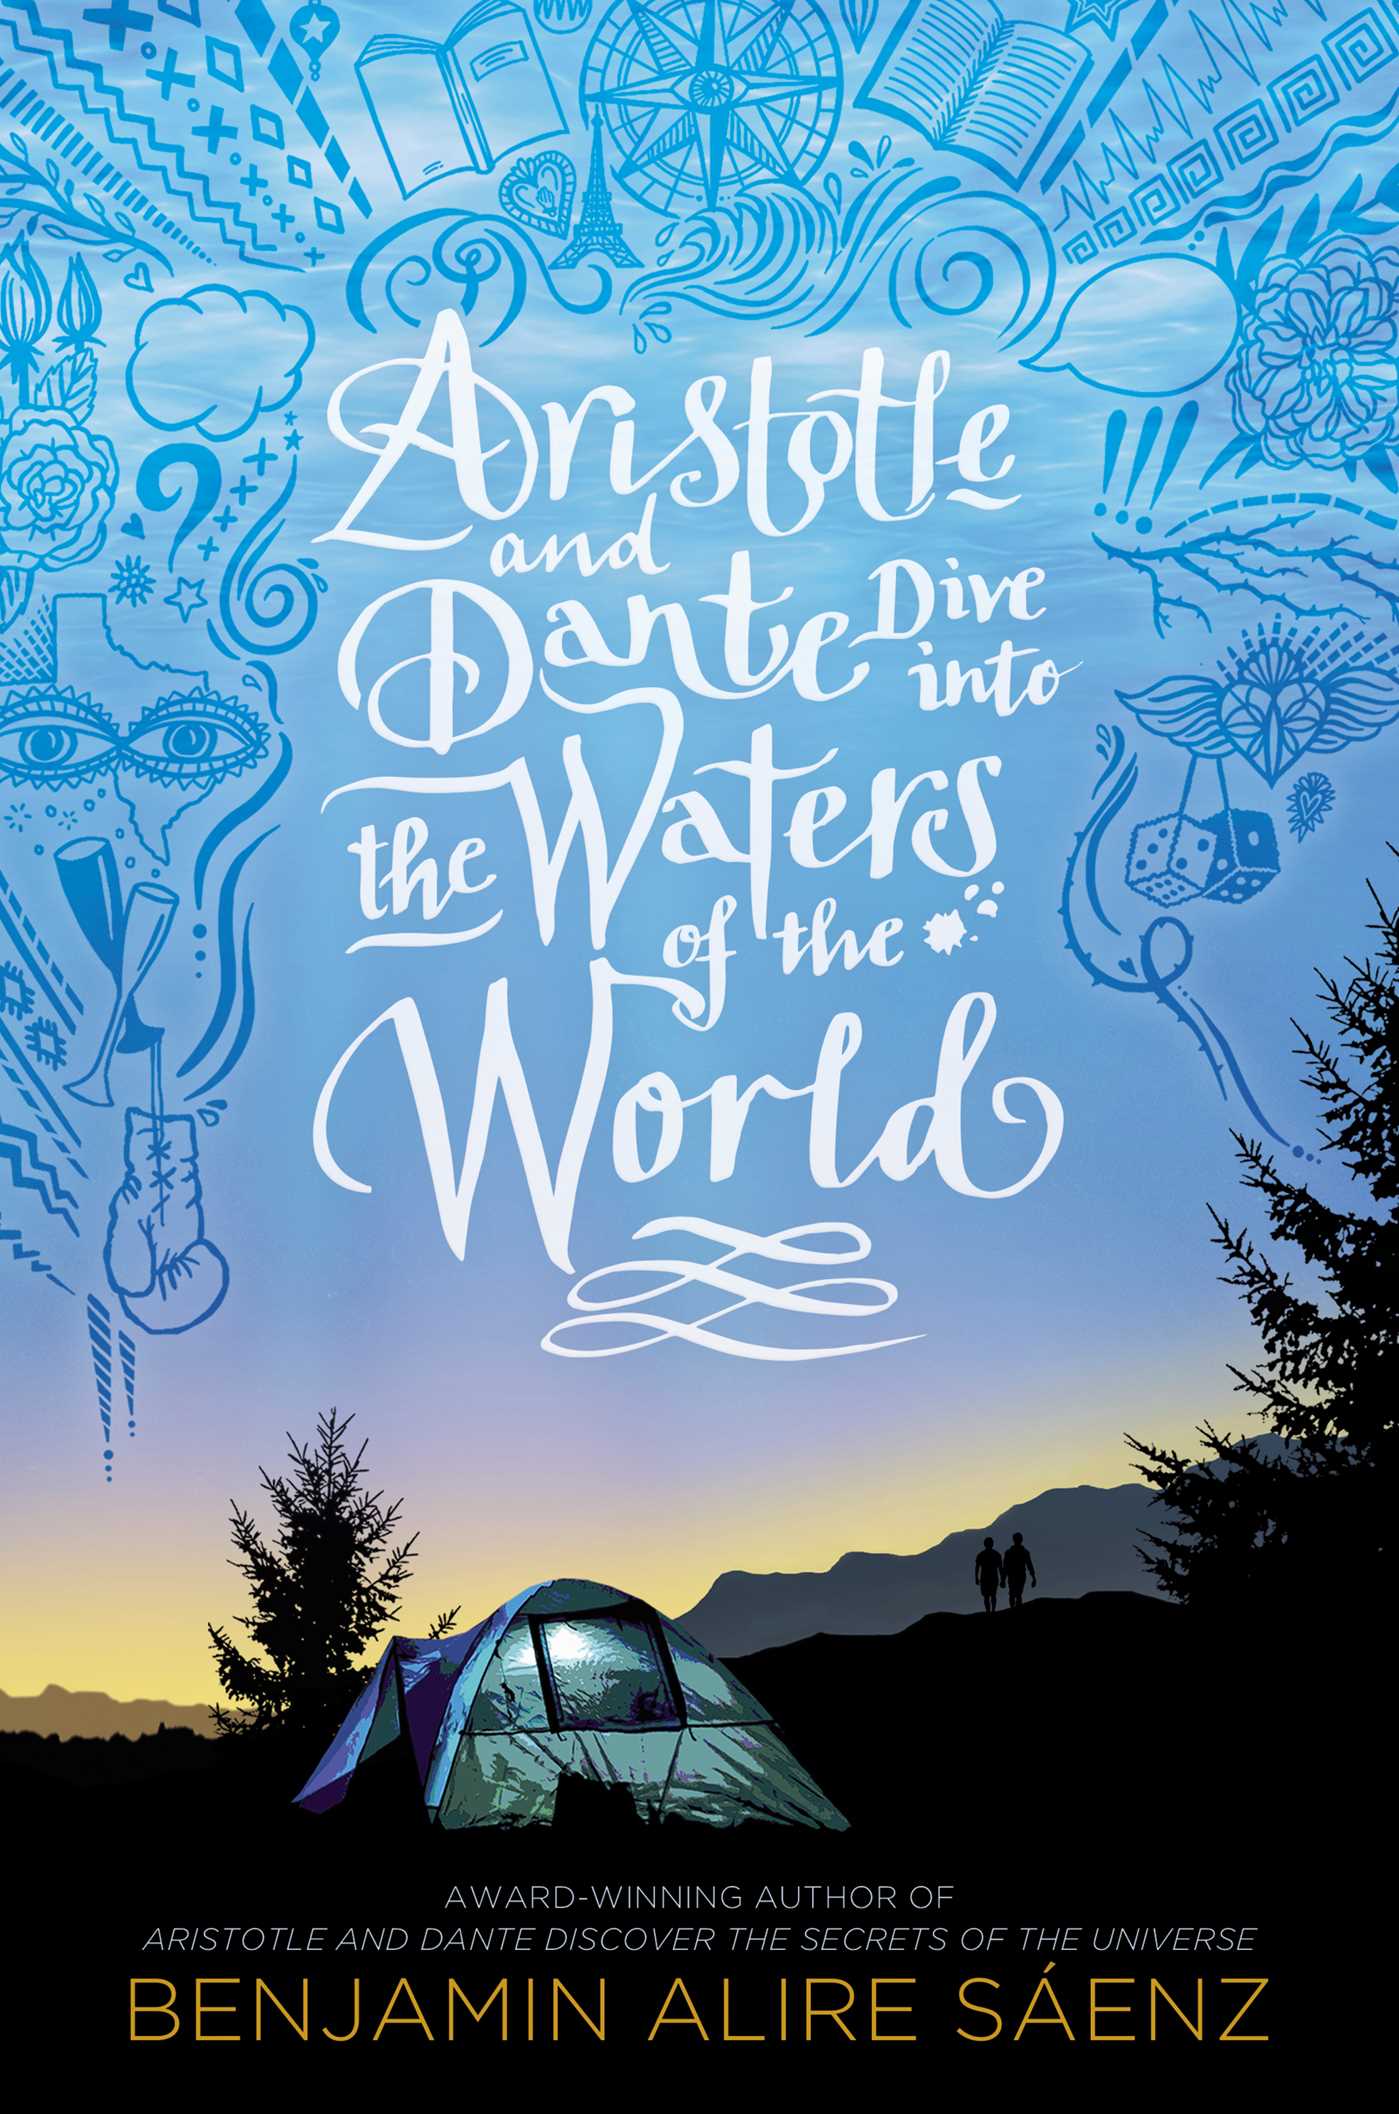 Aristotle and Dante Dive into the Waters of the World | 9-12 years old